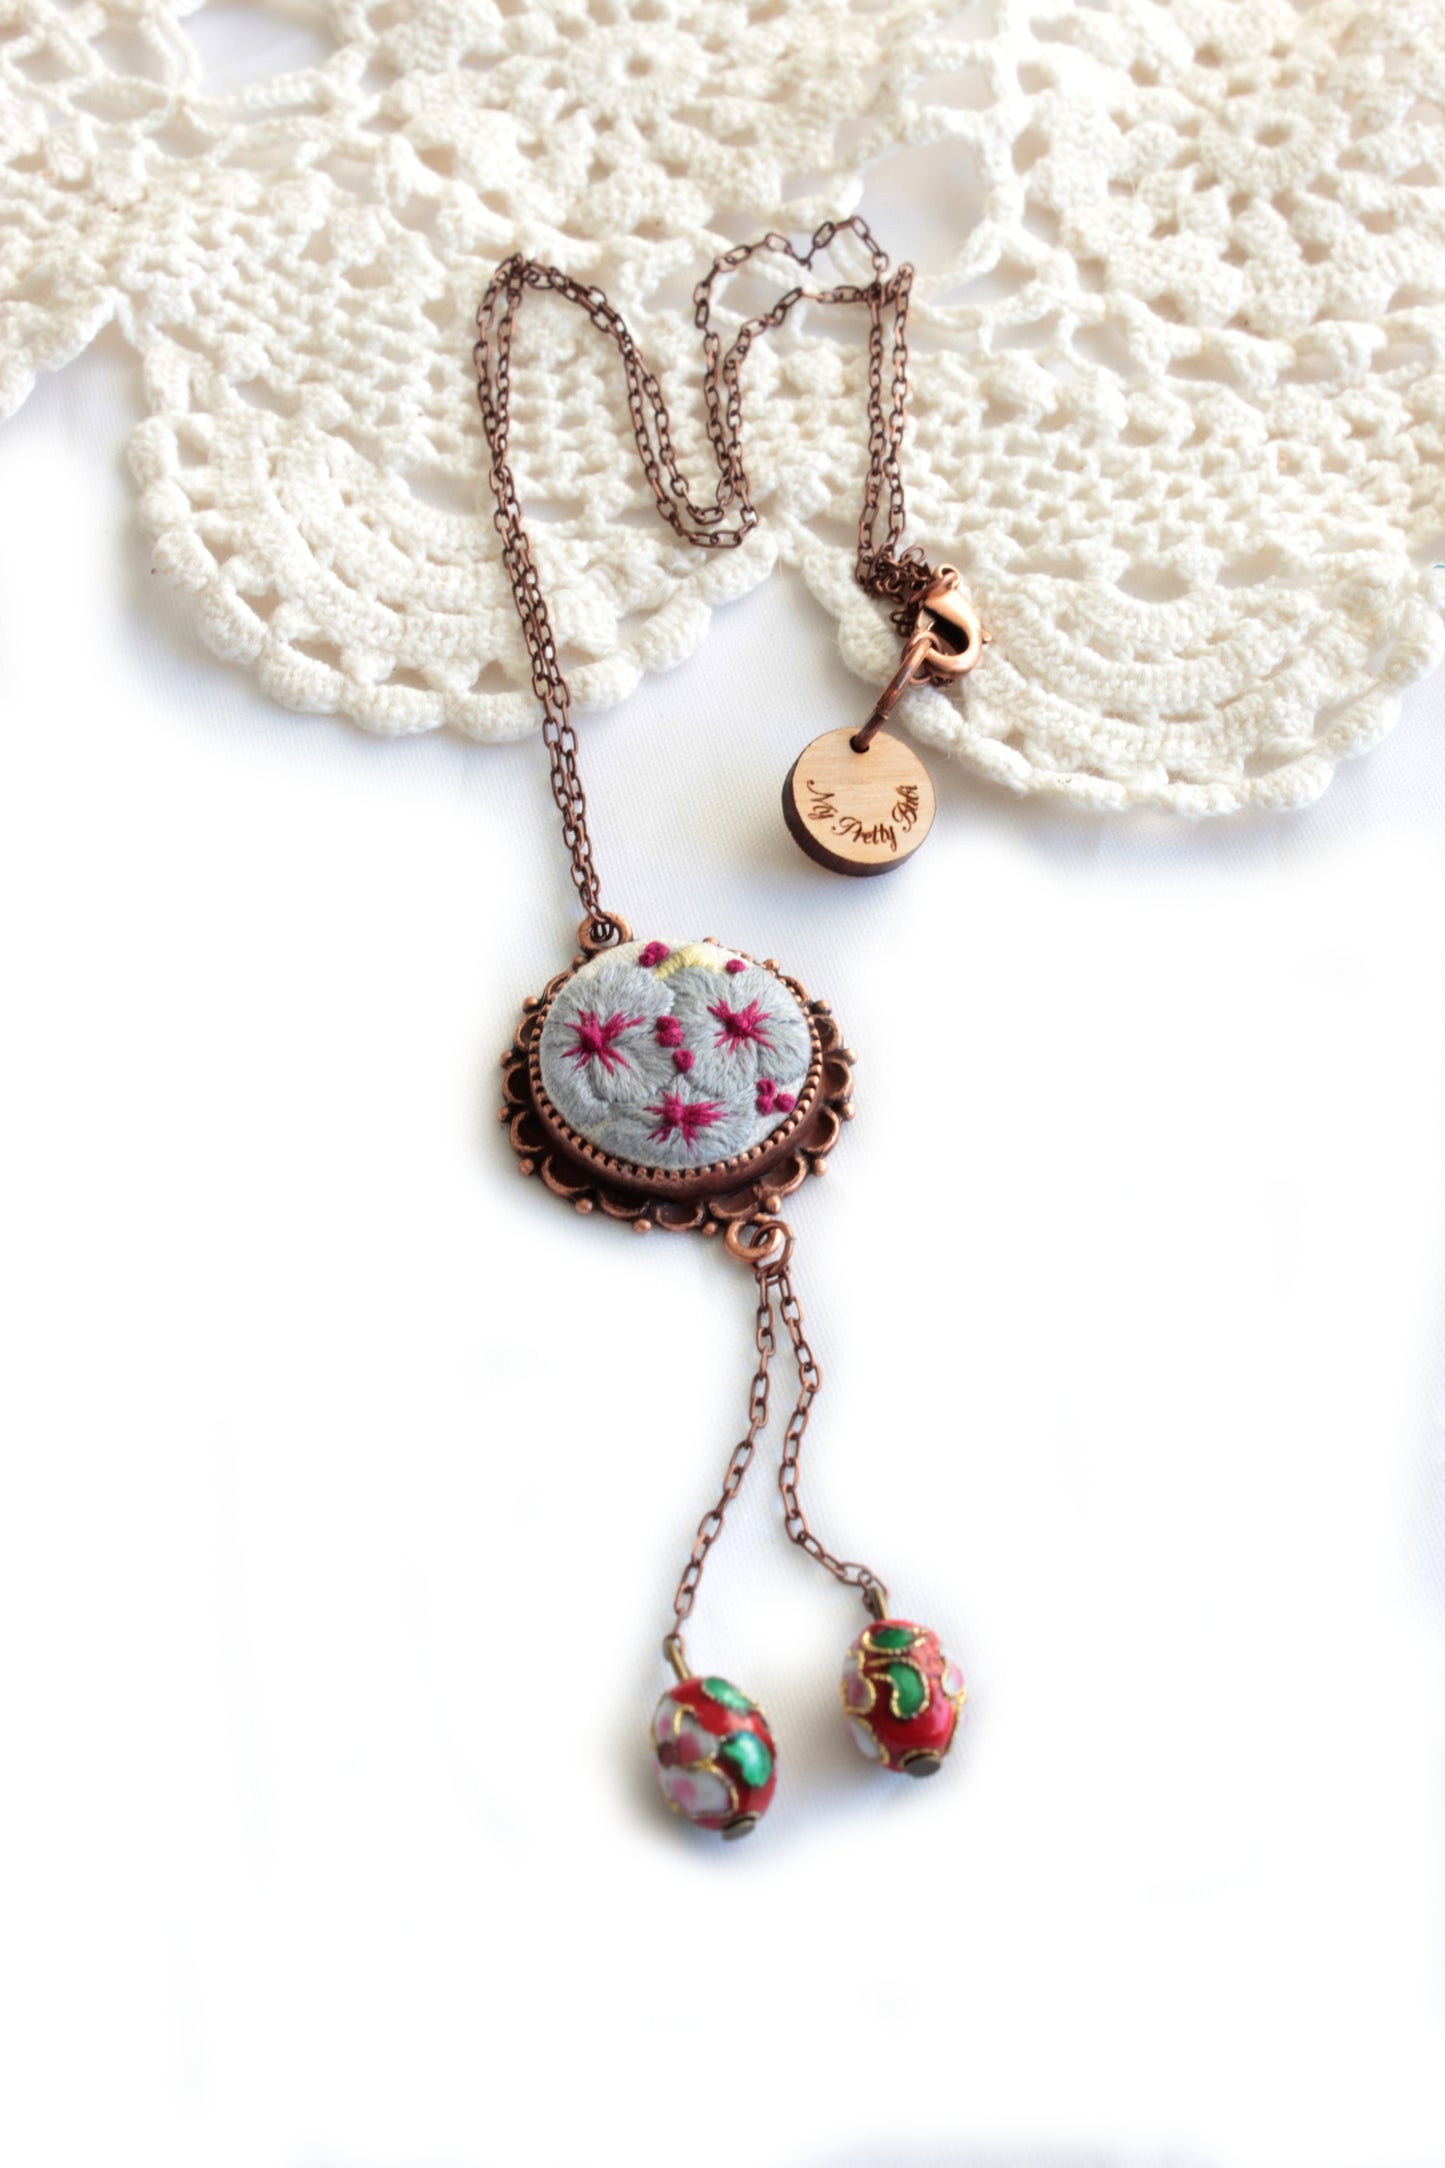 Embroidery Pansies Necklace